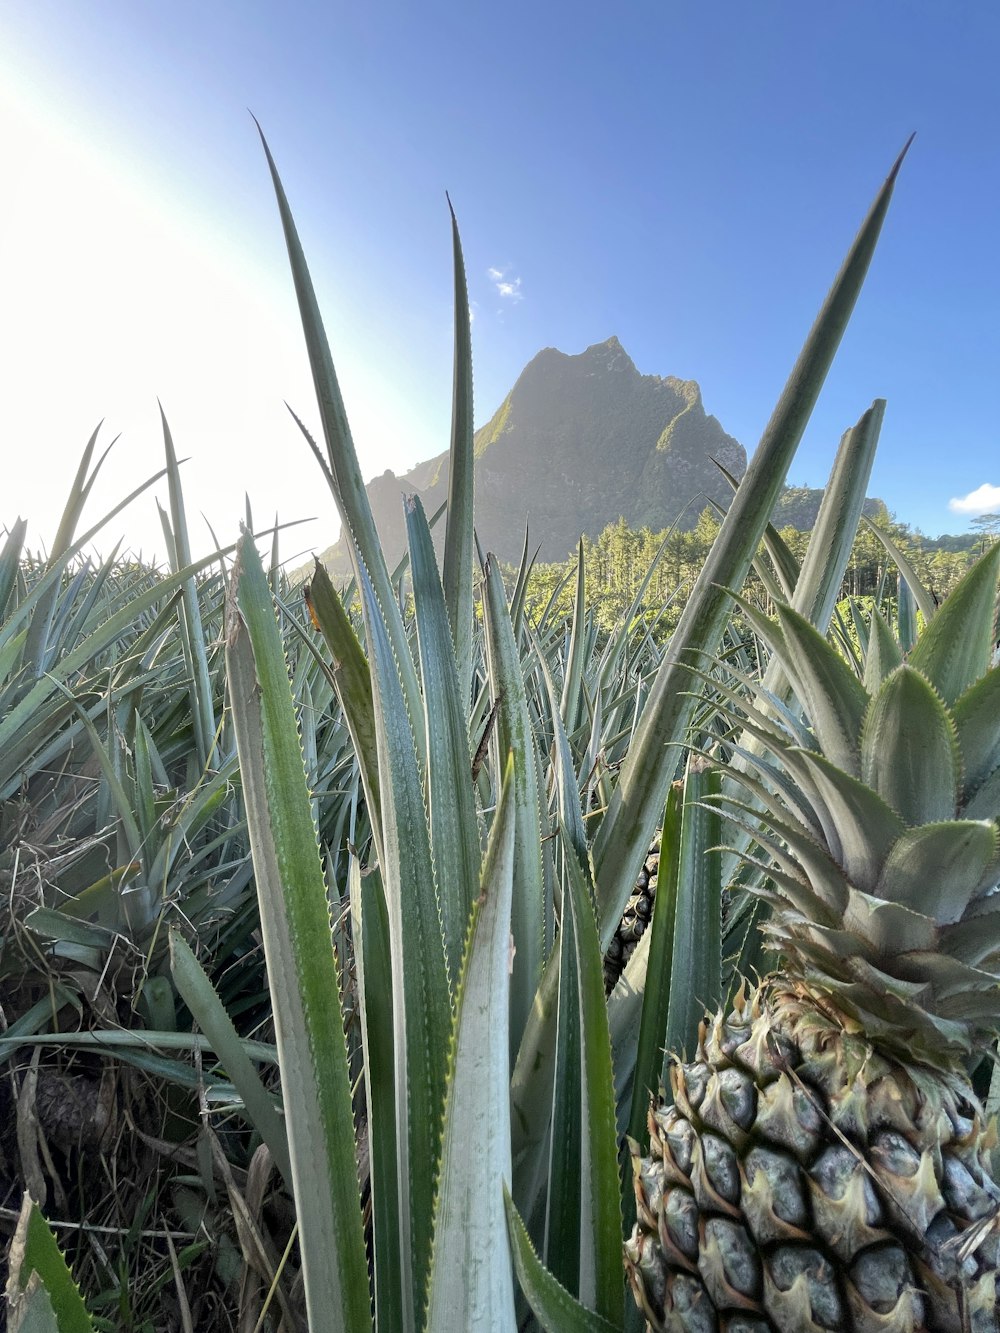 a pineapple and a pineapple plant in a field